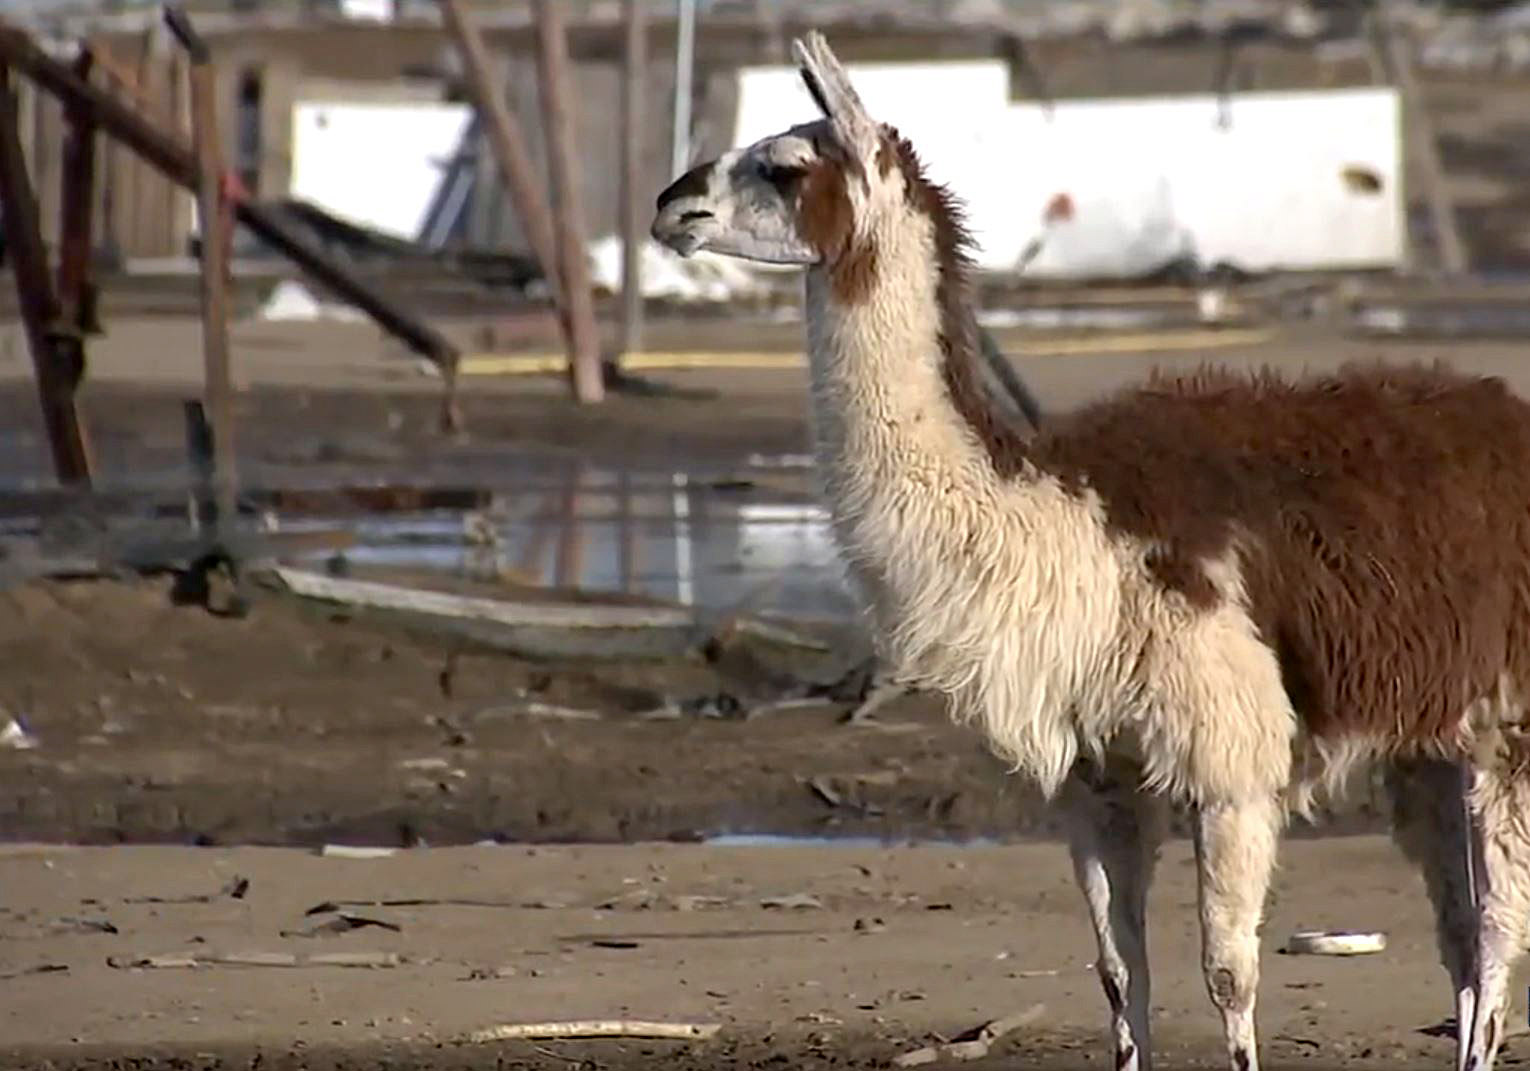 PHOTO: Up to 30 llamas were set loose after they were stolen from an exotic animal farm in Perris, Calif., Dec. 30, 2019.